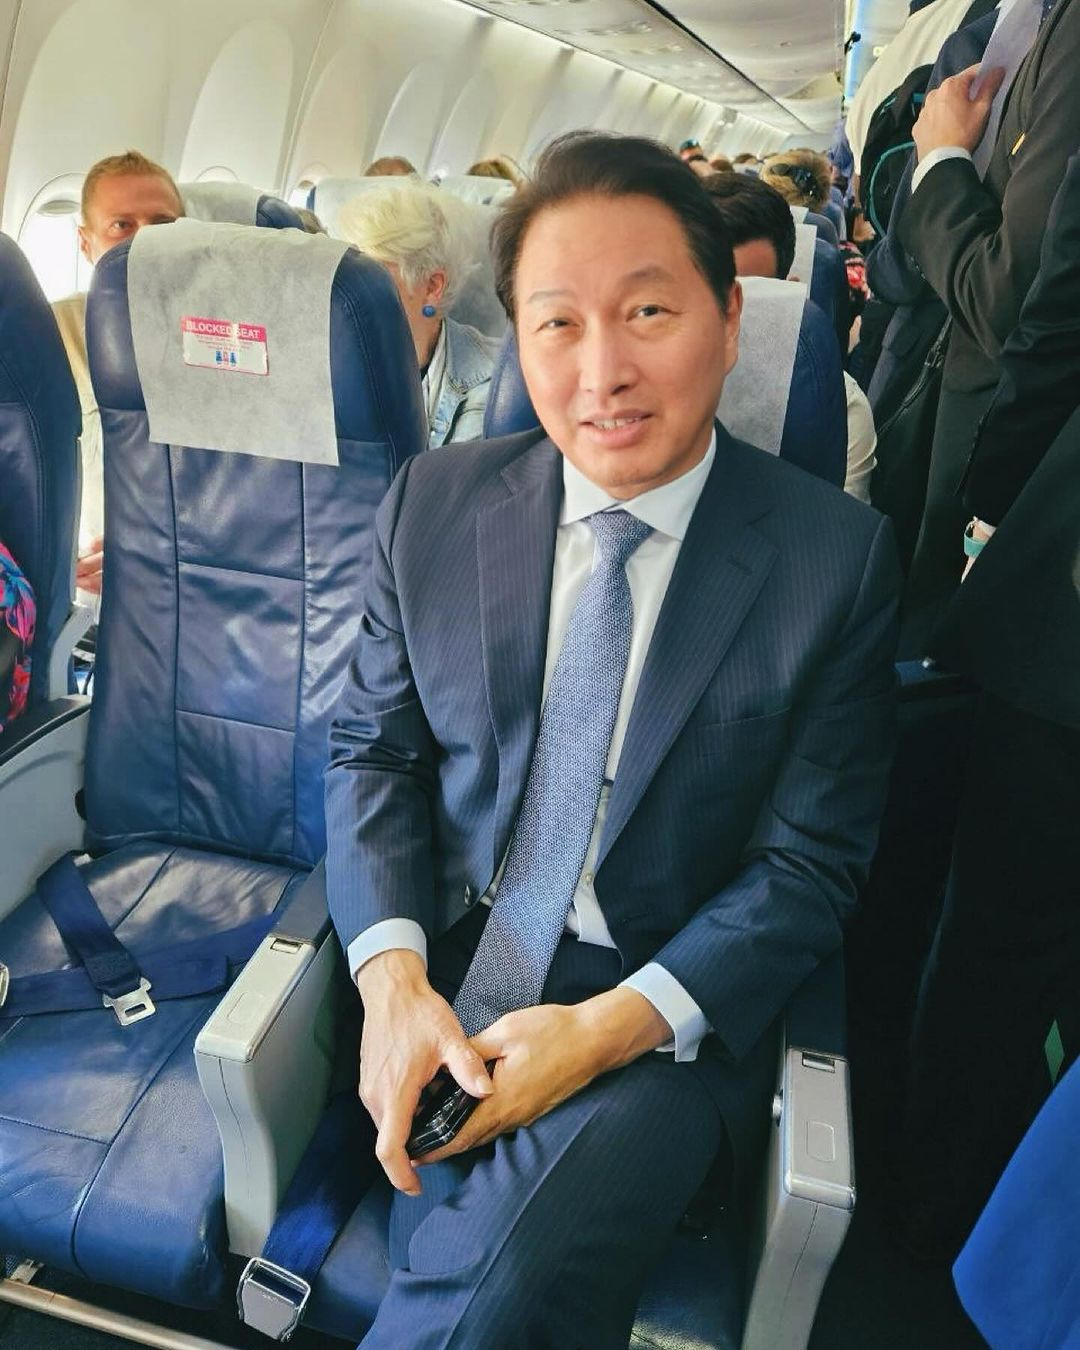 SK Group Chairman Chey Tae-won on Thursday posted a photo of him flying economy during his international campaign for Busan's Expo bid in November. (Chey Tae-won's official Instagram)